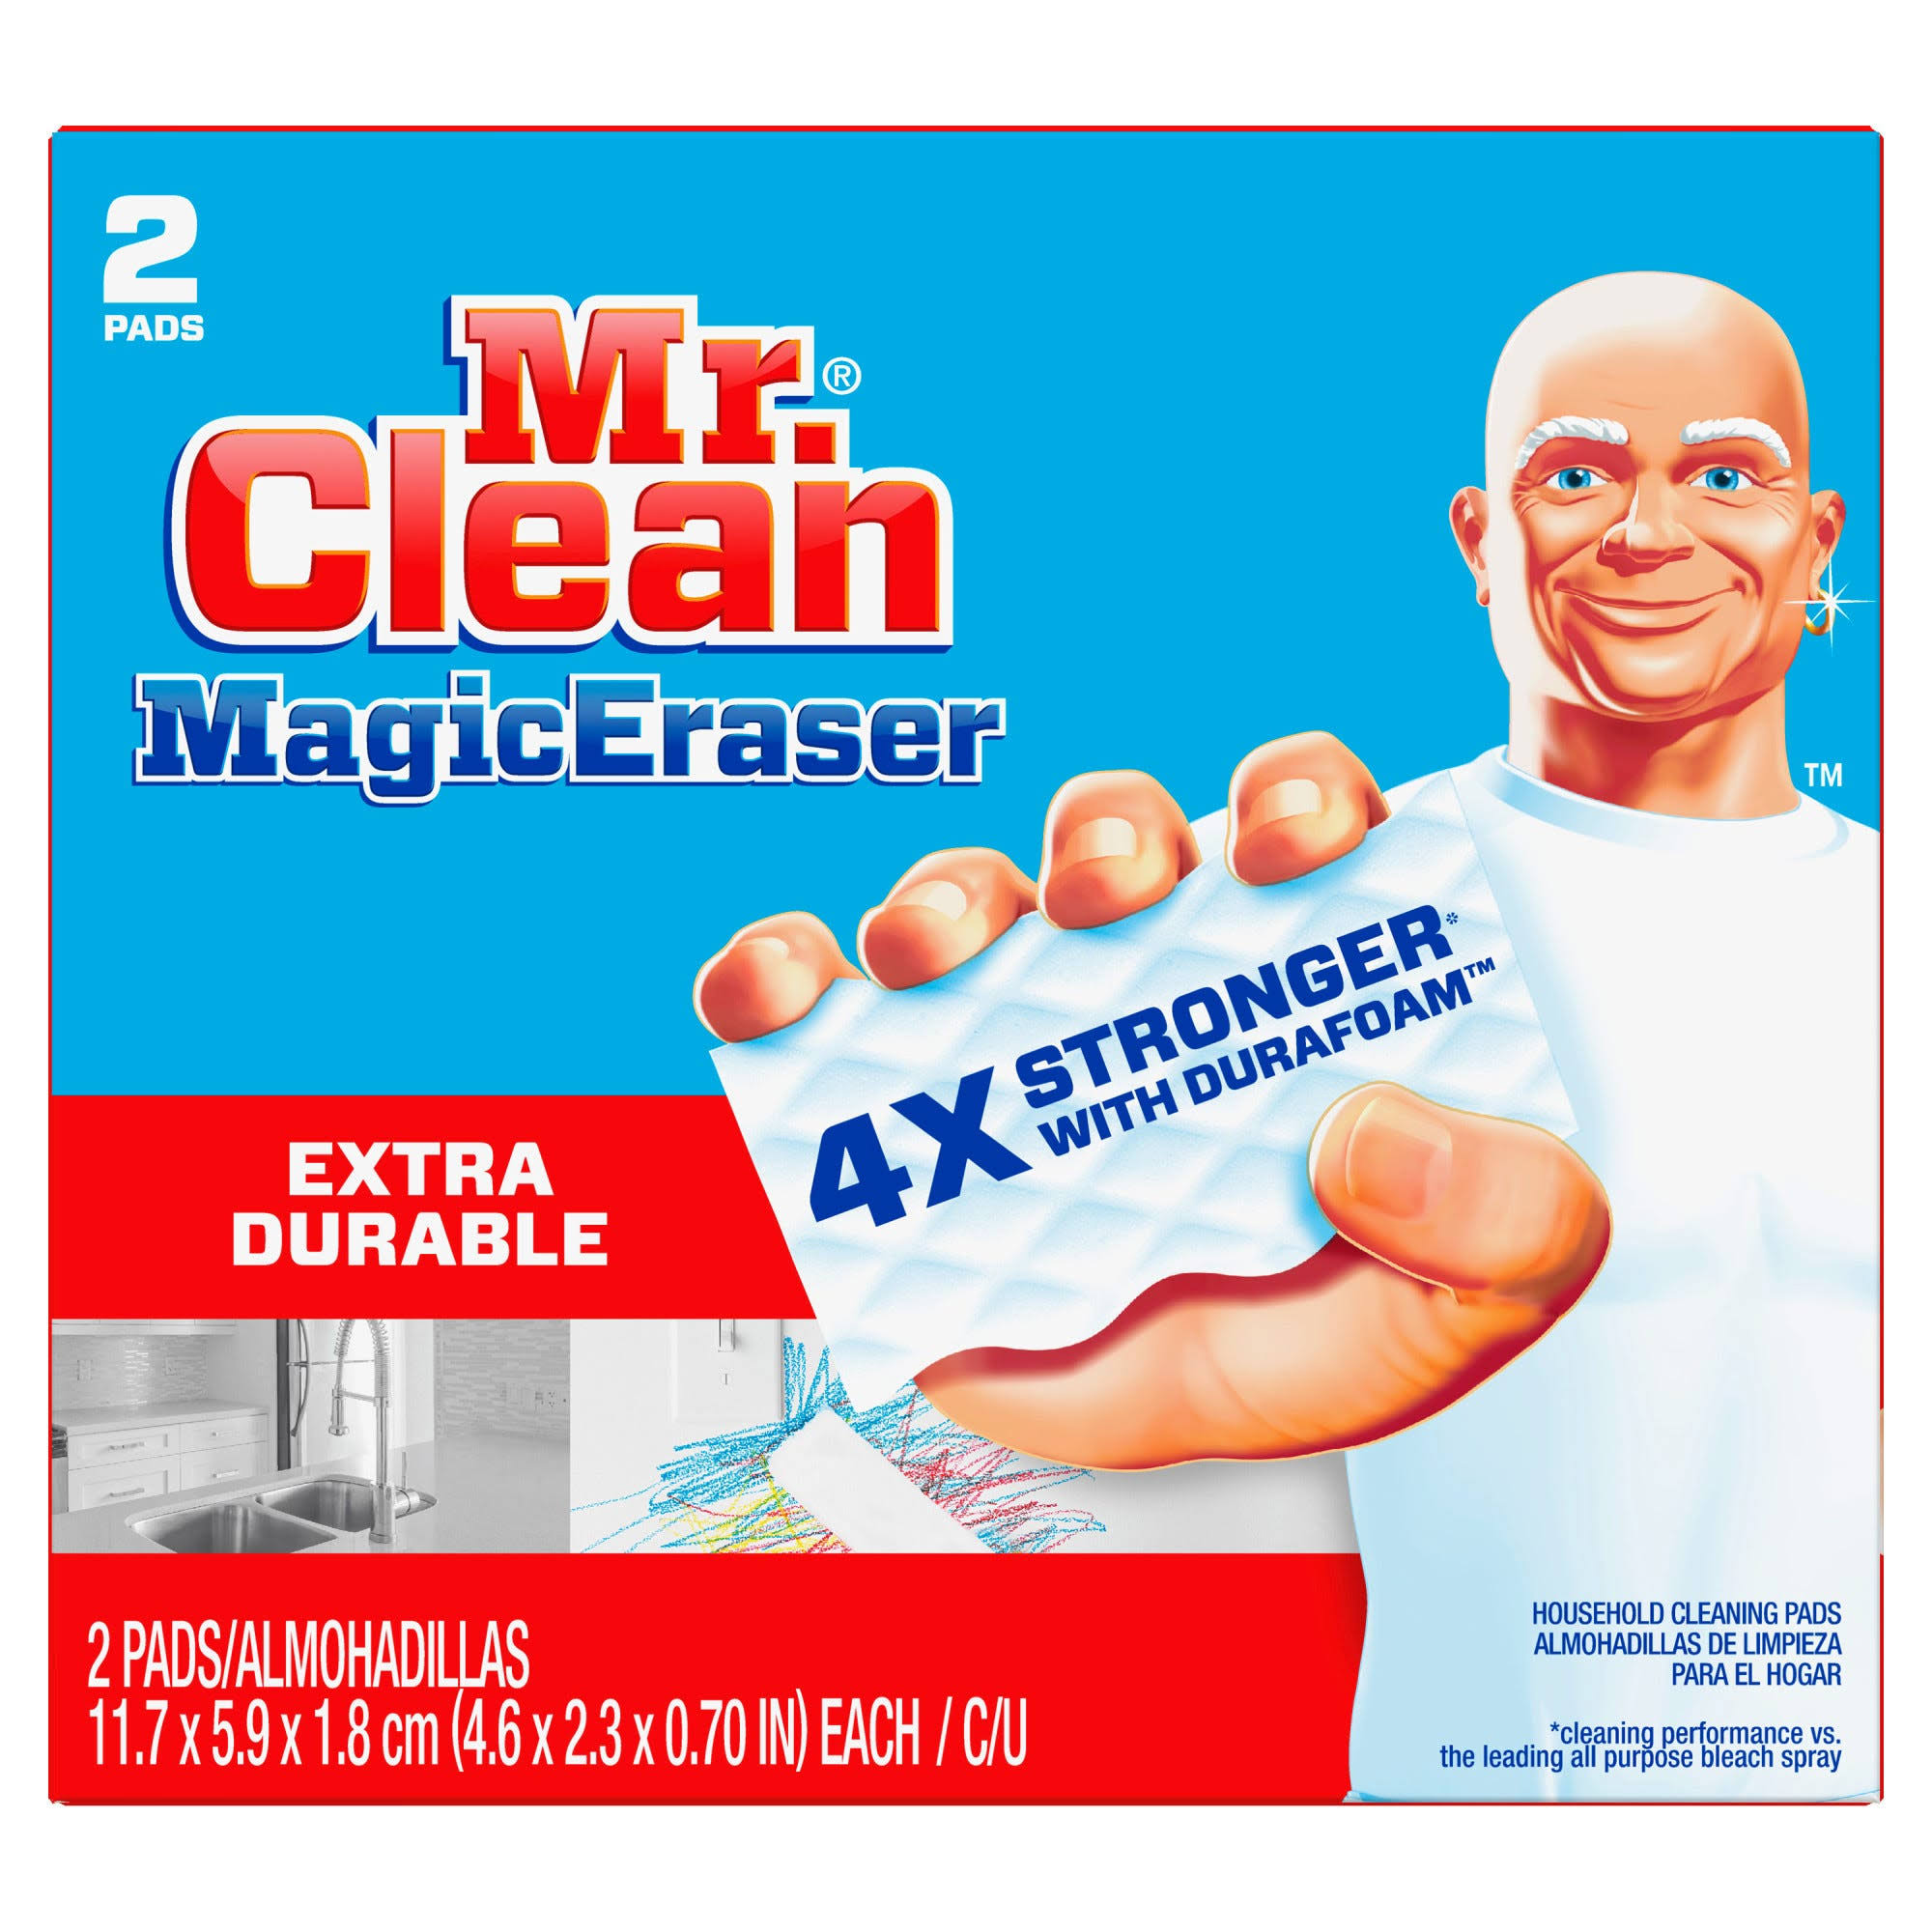 Mr. Clean Magic Eraser Extra Durable Household Cleaning Pads - 2 Pads